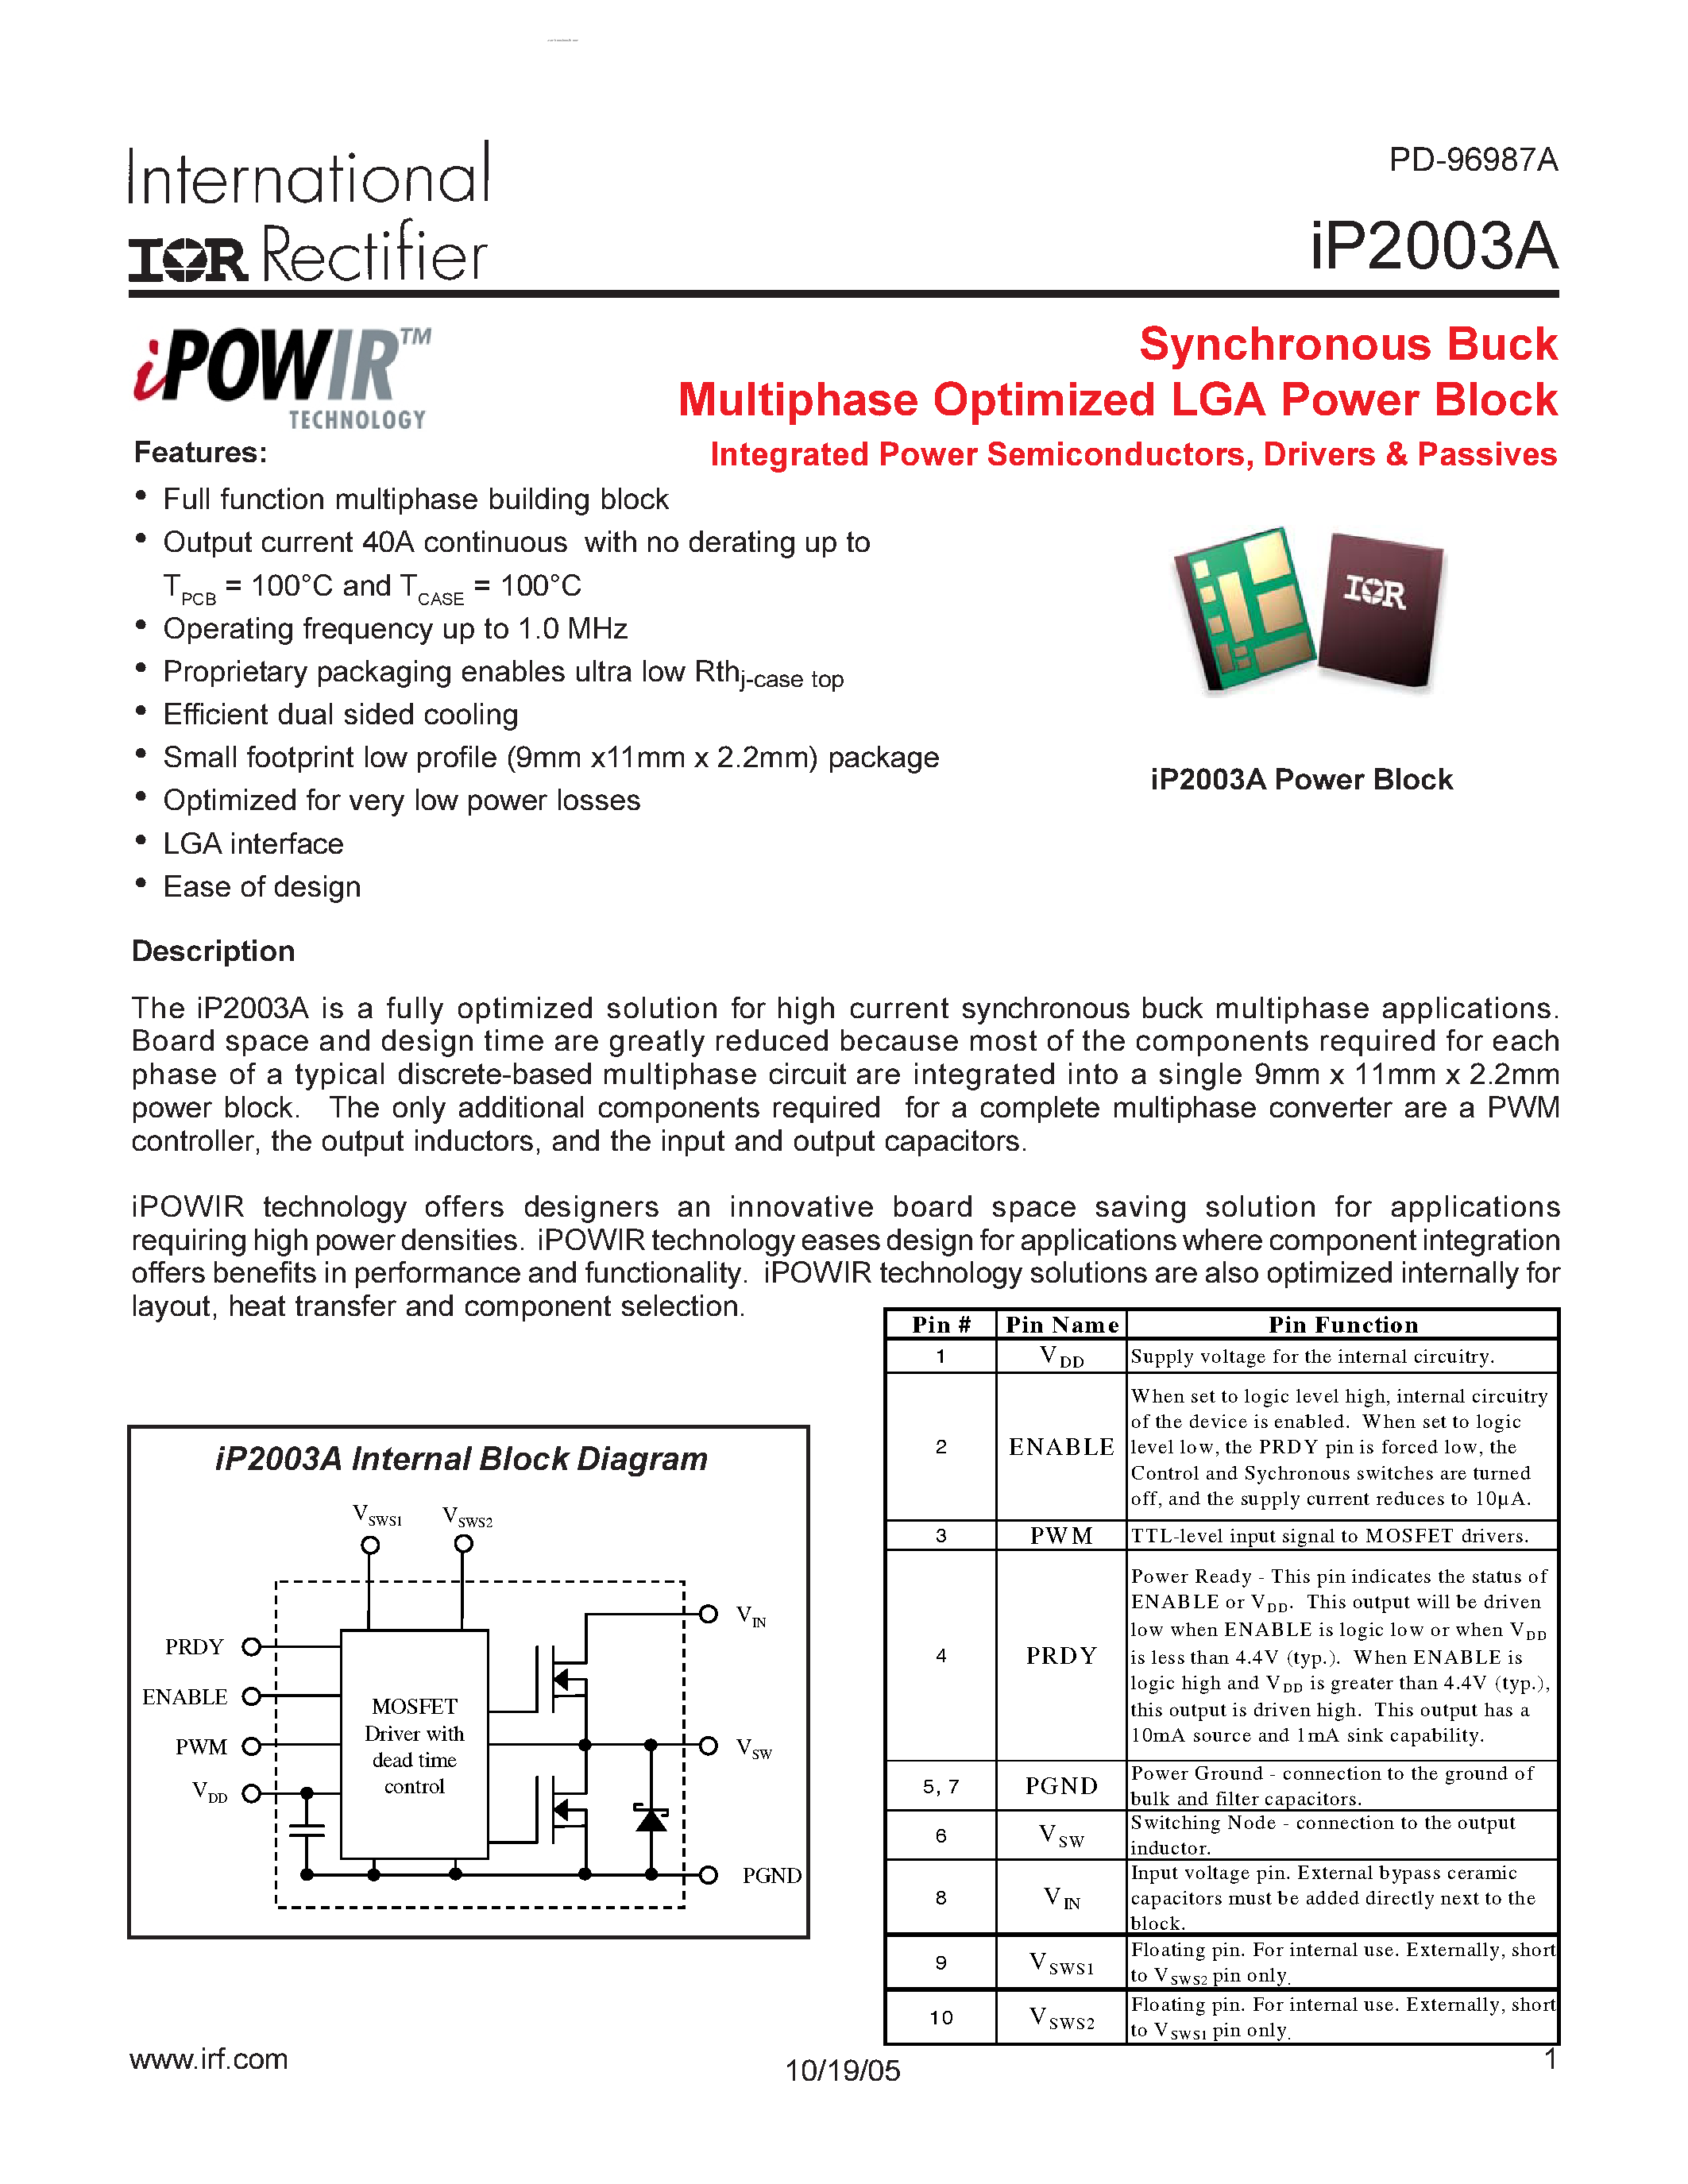 Datasheet IP2003A - Synchronous Buck Multiphase Optimized LGA Power Block Integrated Power Semiconductors page 1